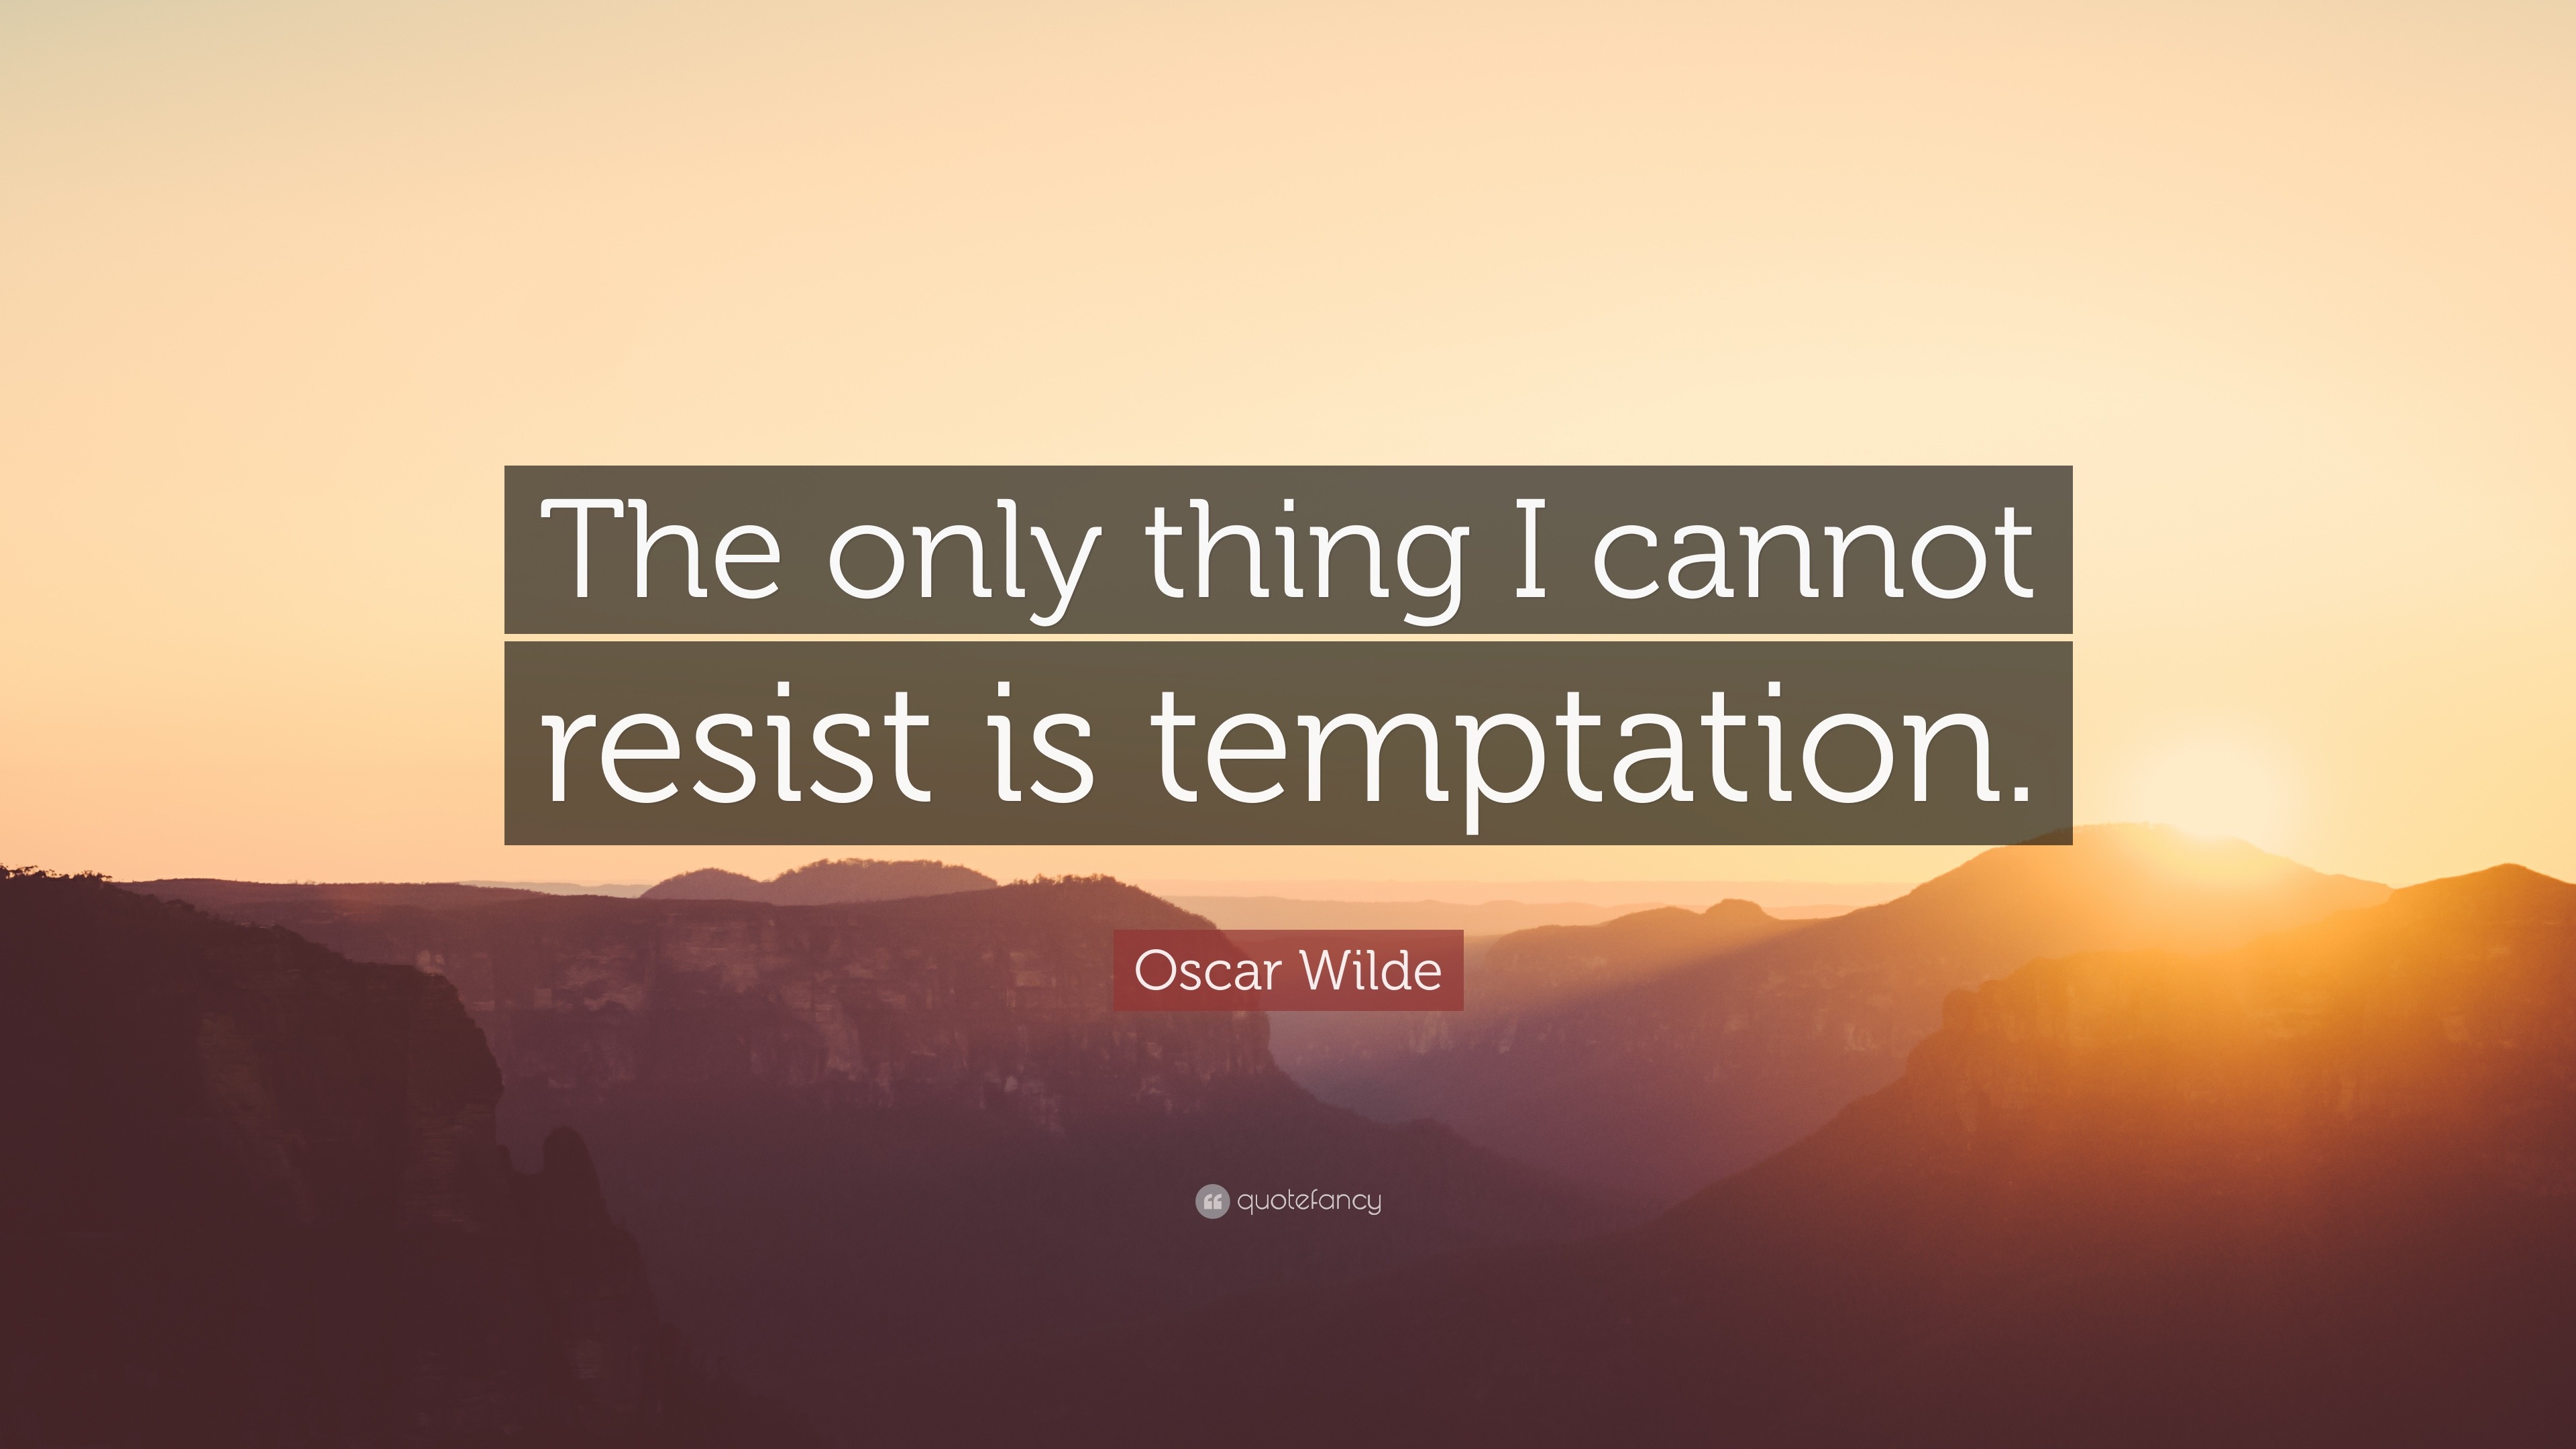 Oscar Wilde Quote: "The only thing I cannot resist is temptation."